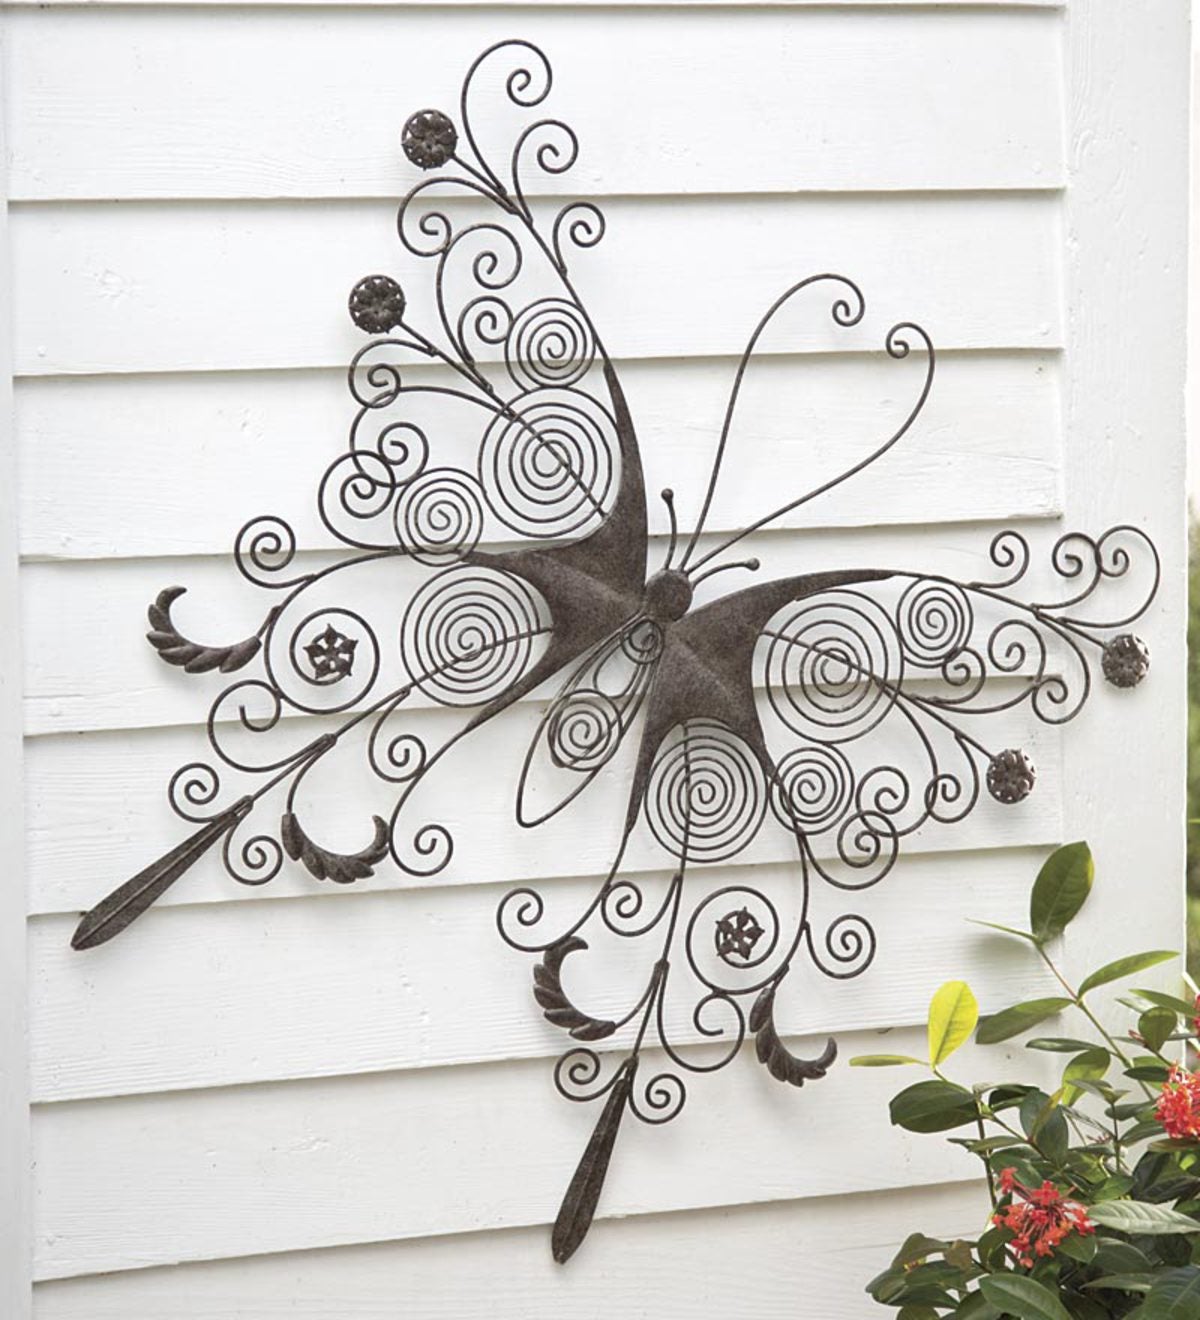 Vintage Metal Butterfly Wall Art Hanging Decor for Outdoor Garden Patio Yard 